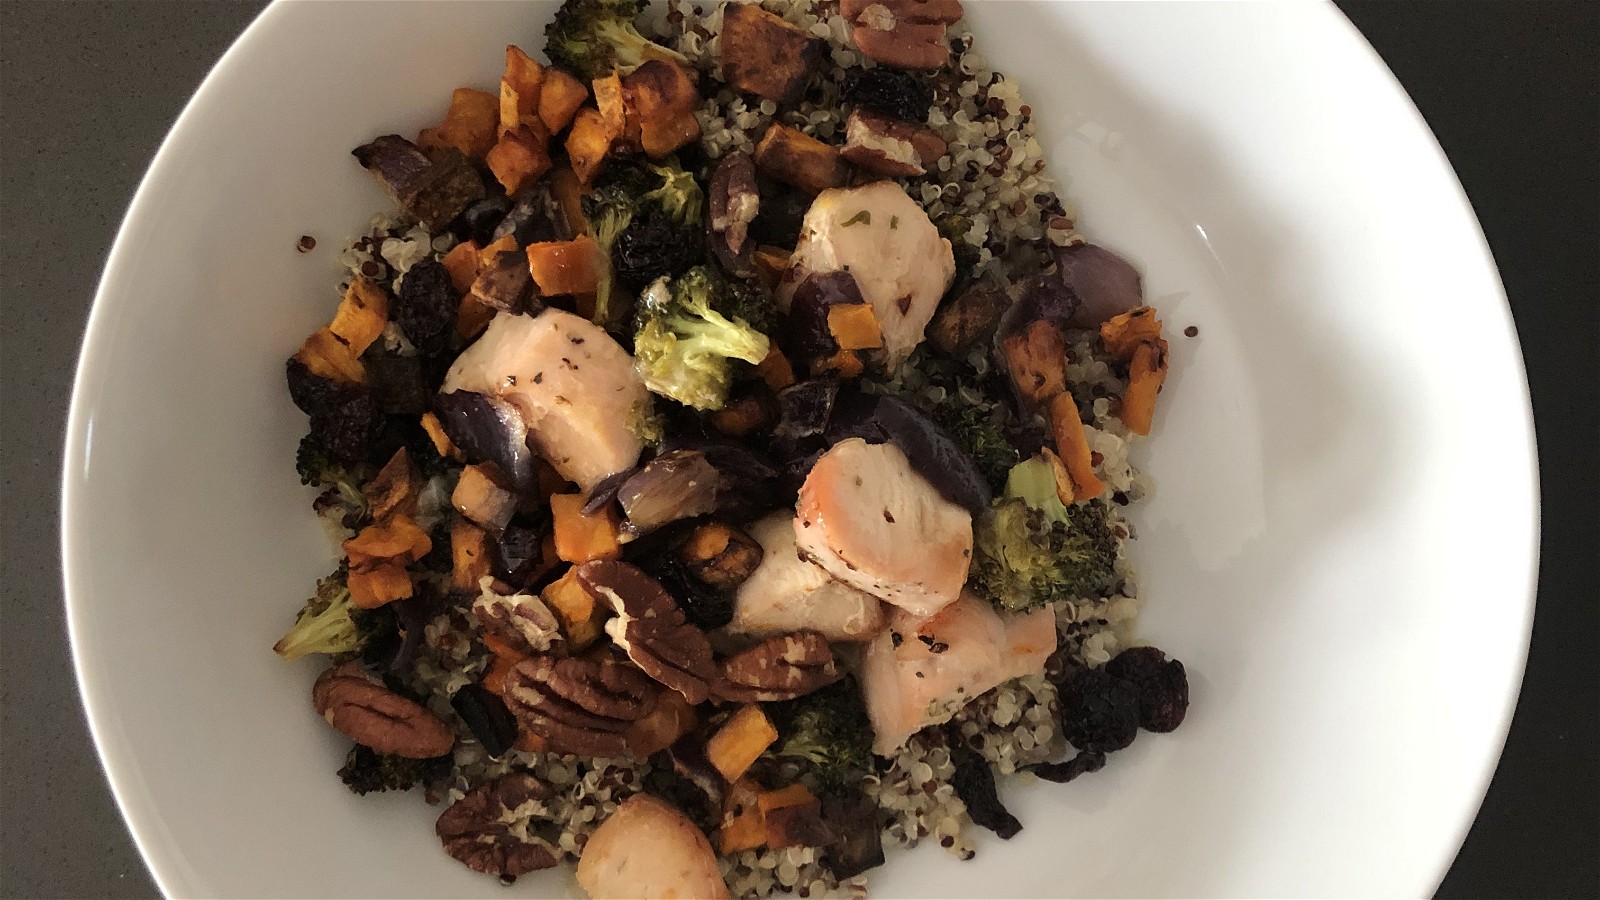 Image of Roasted Chicken, Broccoli and Sweet Potatoes